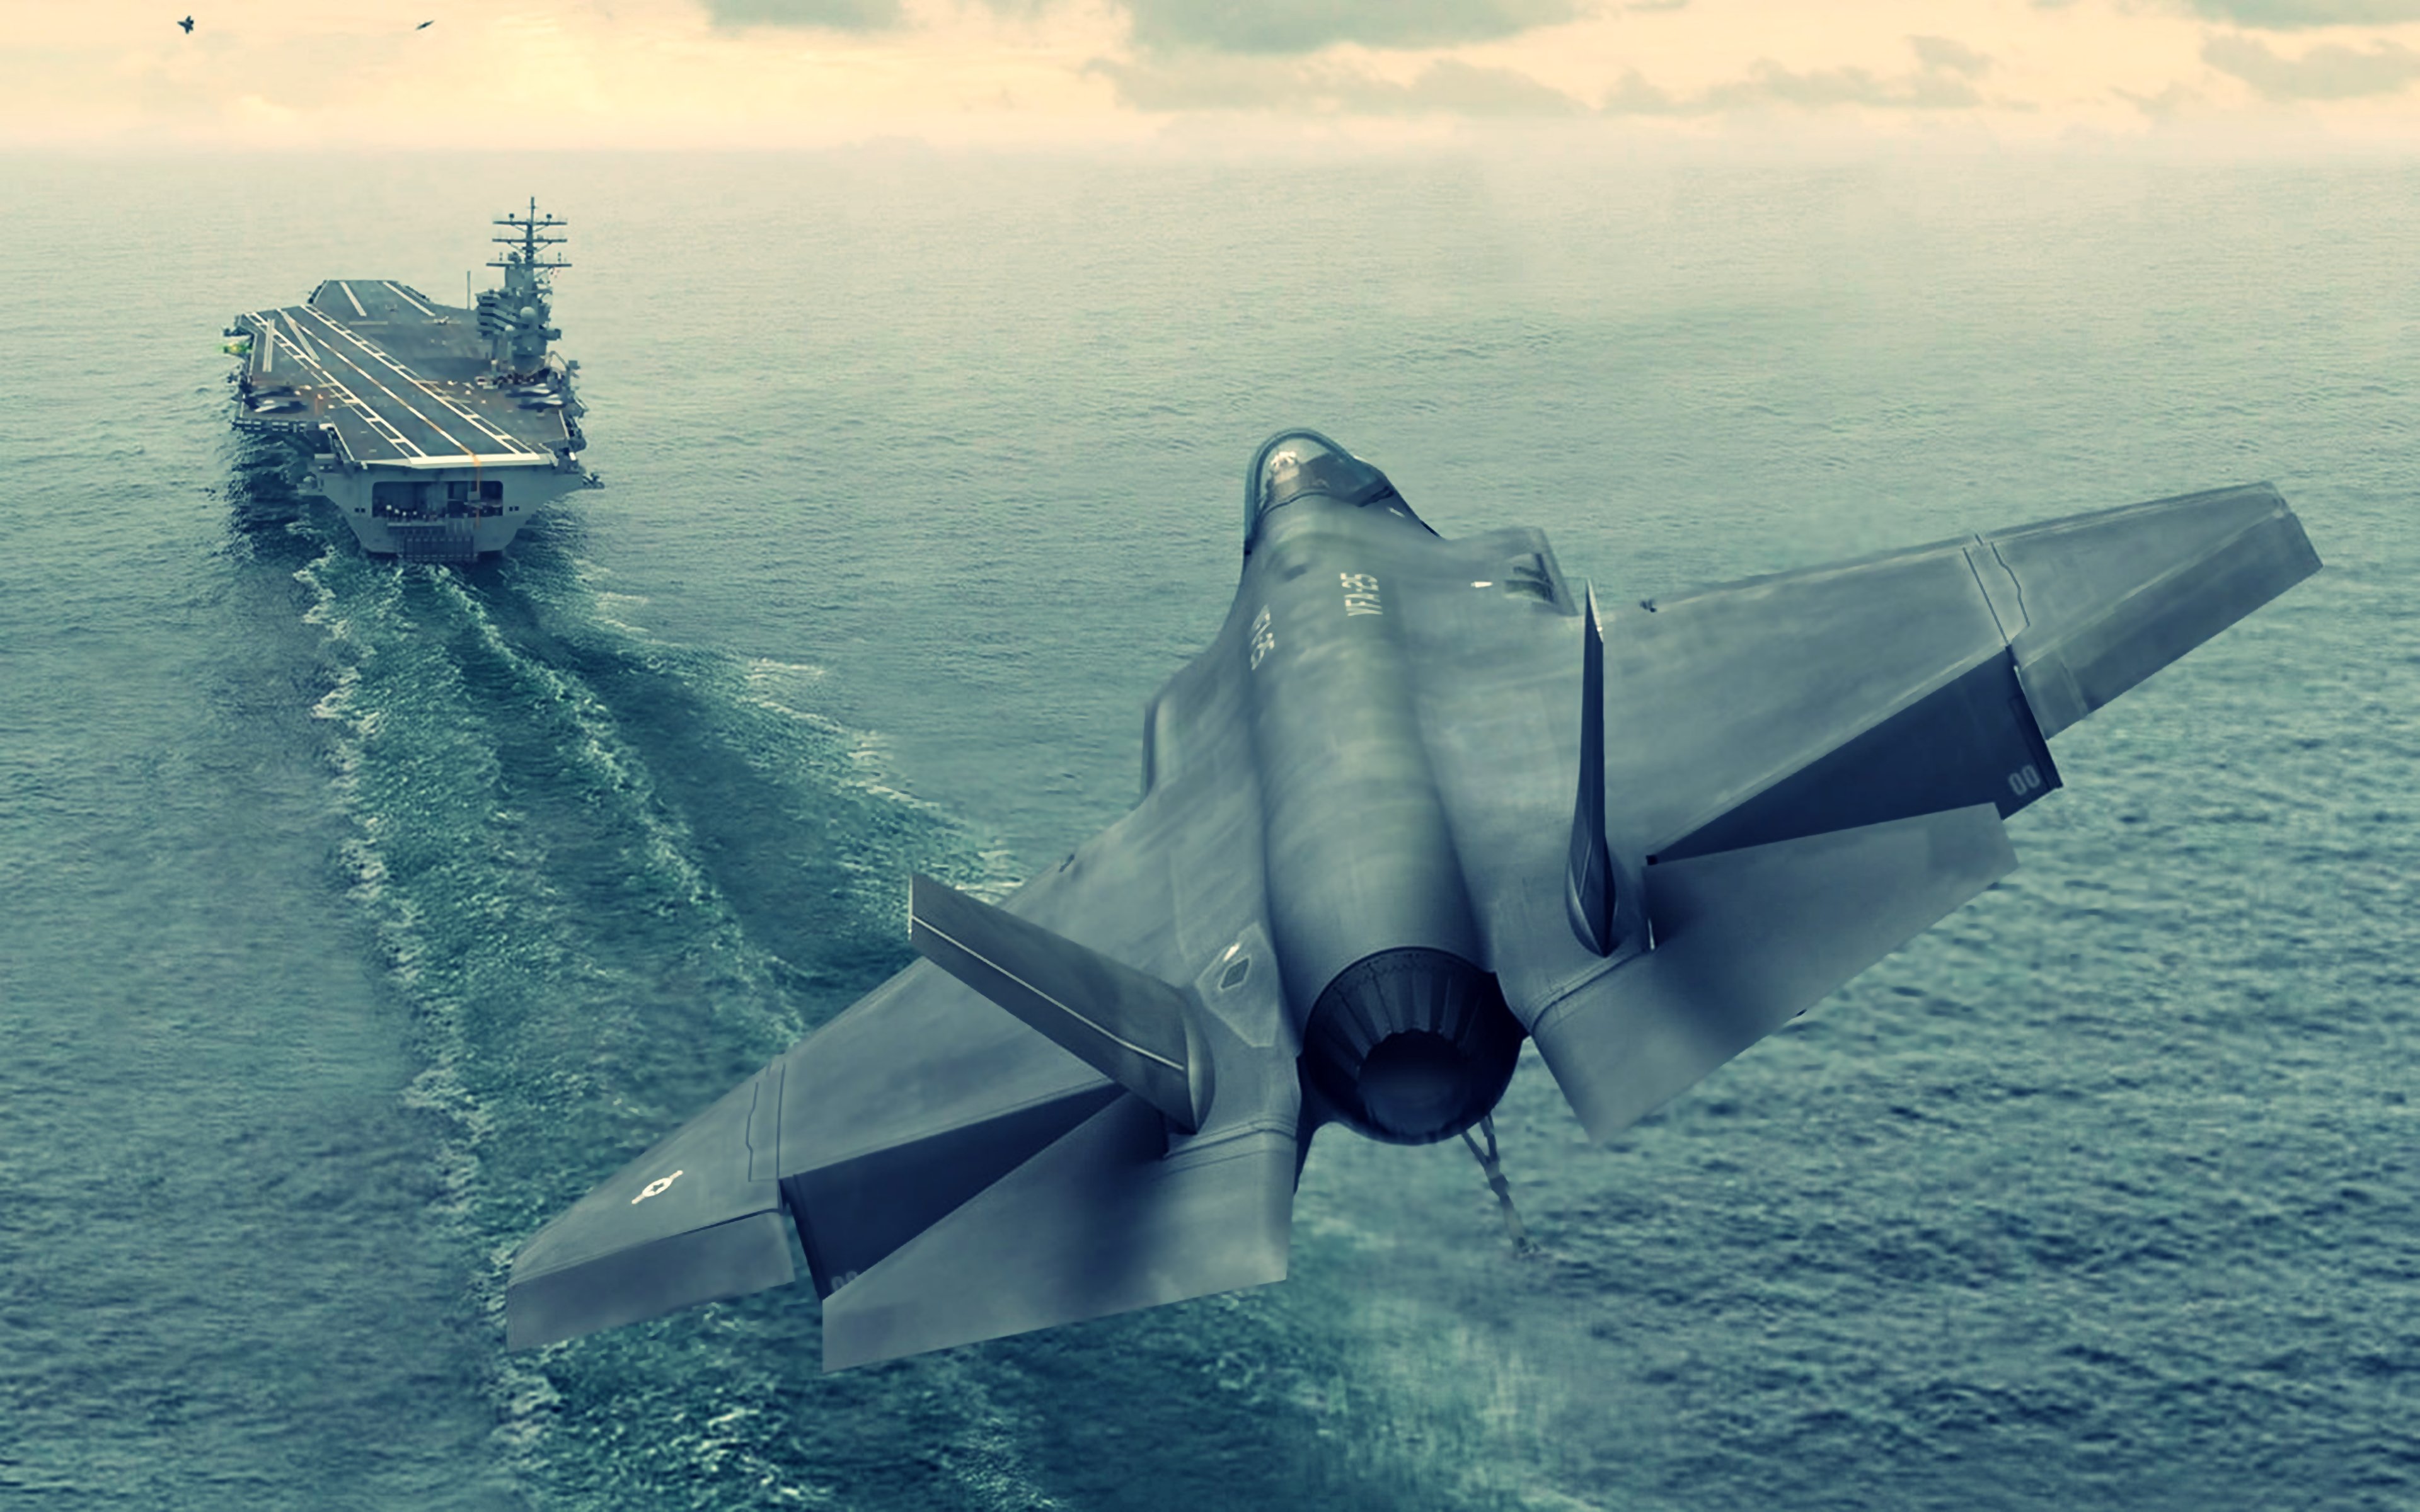 f 35a, Aircrafts, Earth, Fighters, Carrier, Nature, Planes, Sea, Wars, Review Wallpaper